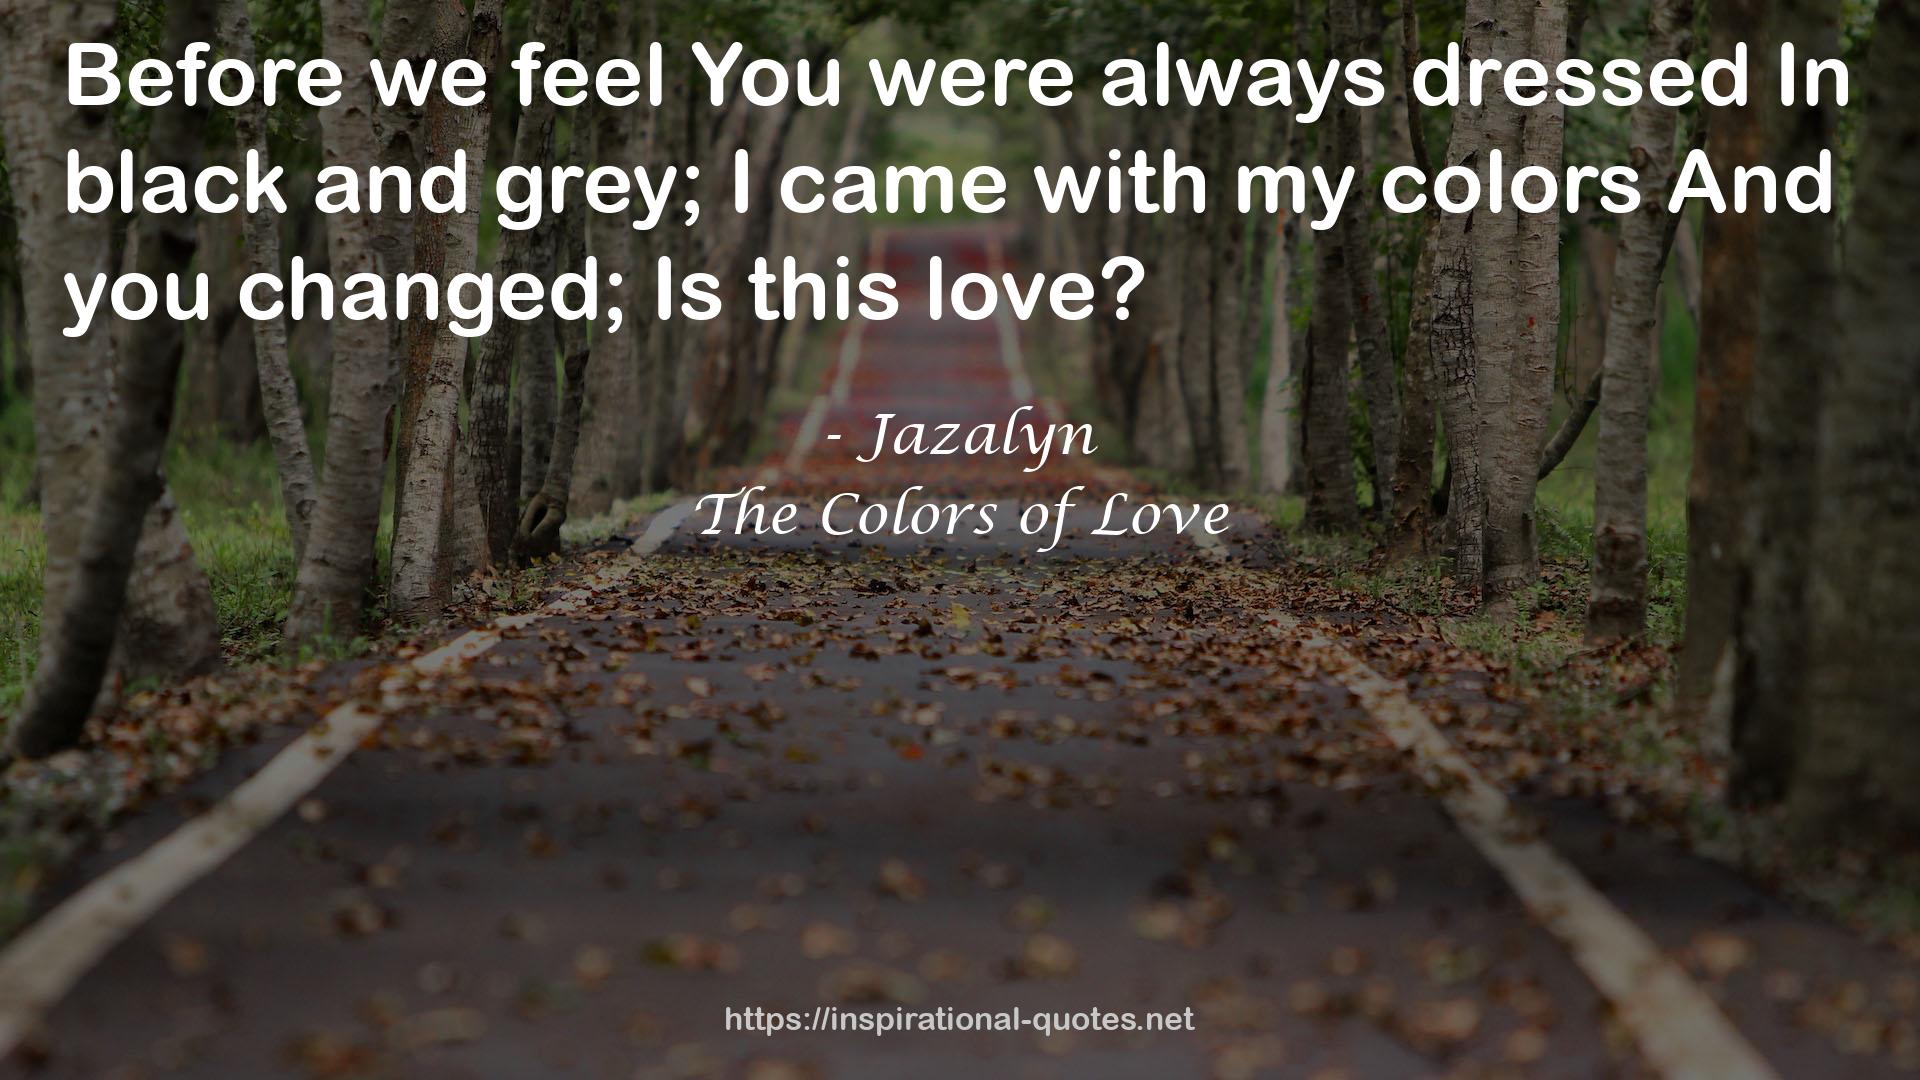 The Colors of Love QUOTES